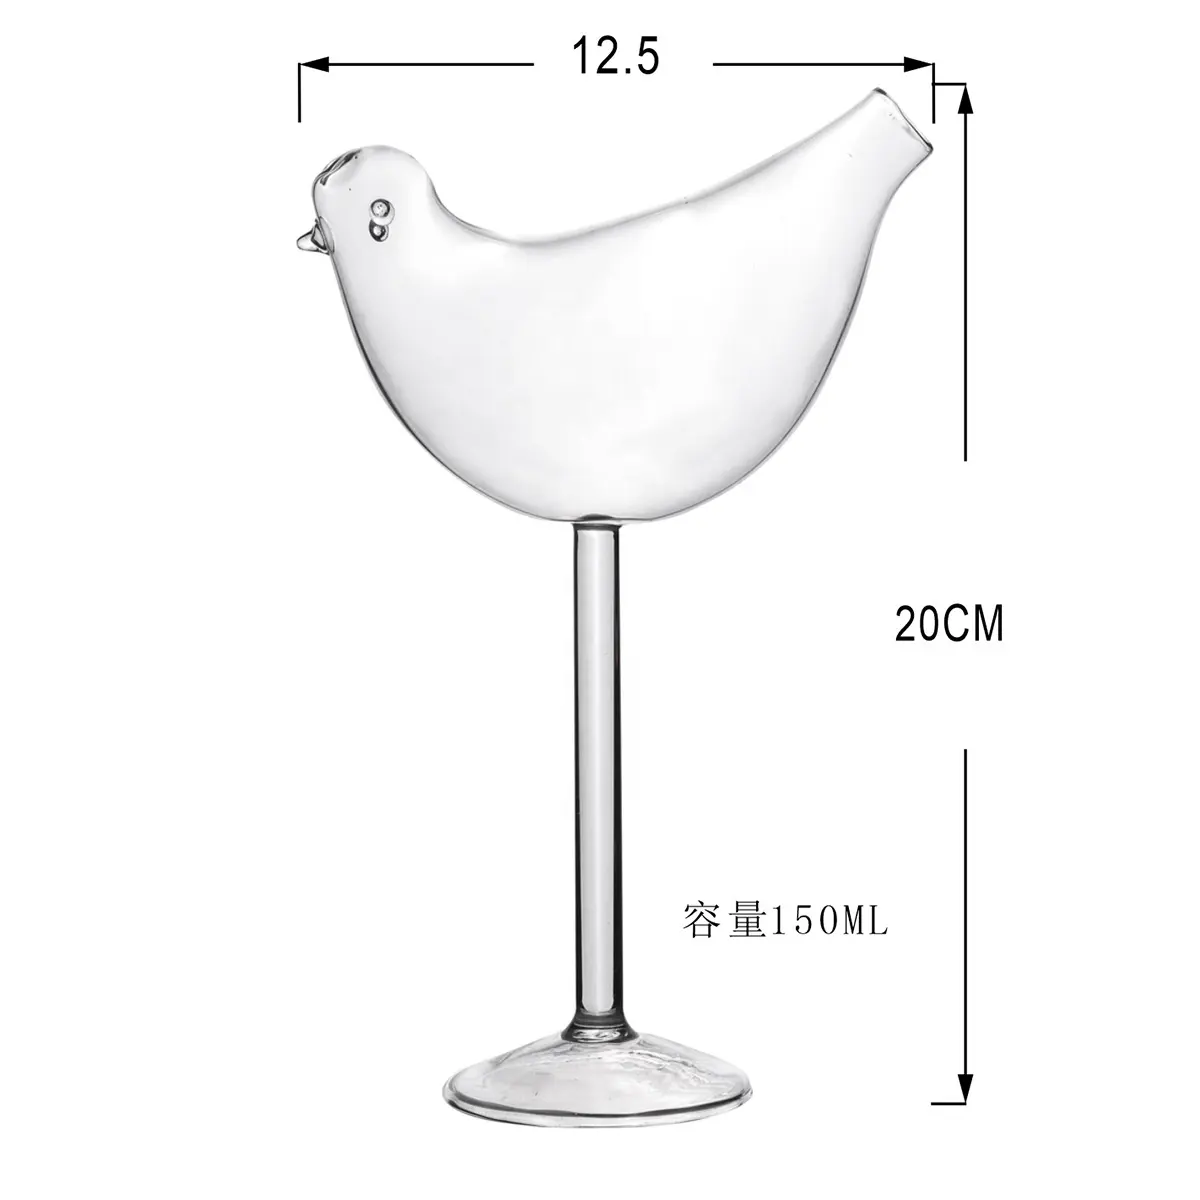 Hot Sale Unique 150Ml Bird Shaped Drinking Glasses Cup Crystal Creative Animal Shape Cocktail Glass For Beverage Bar